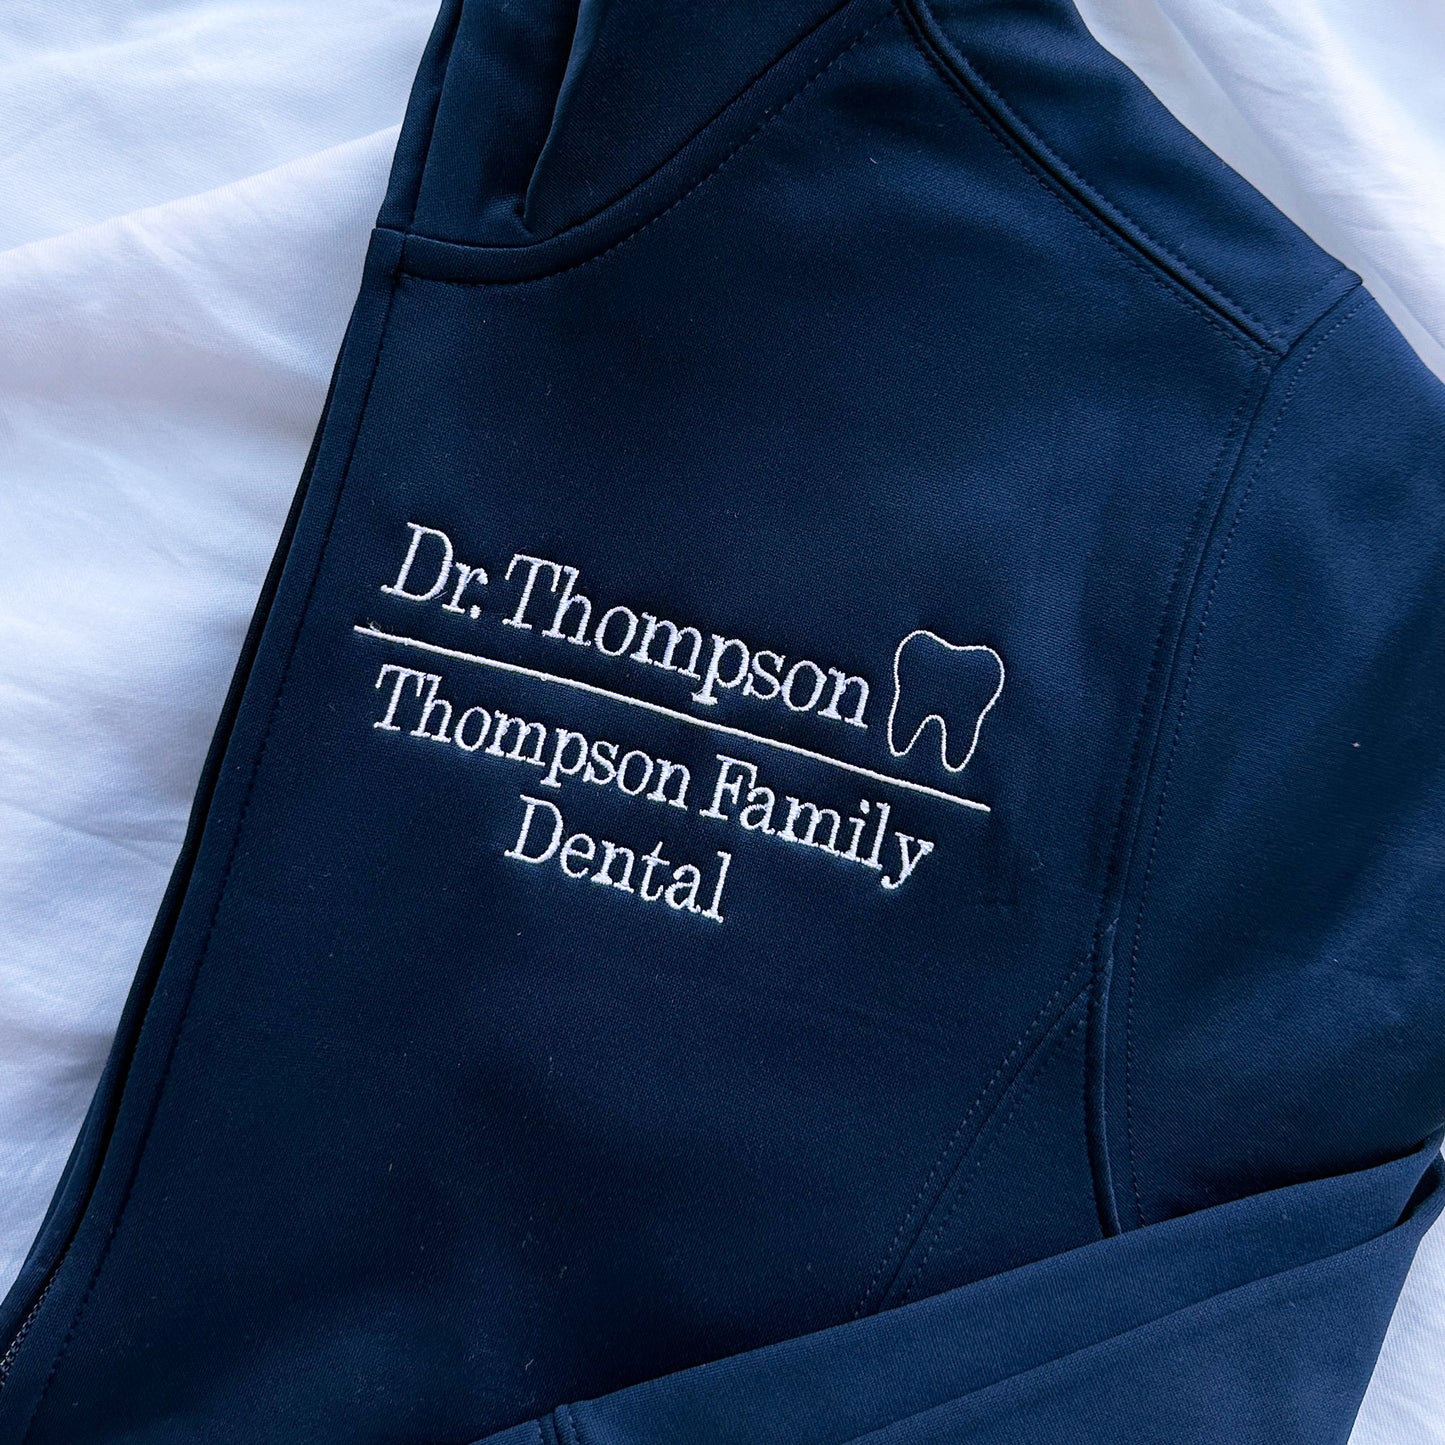 close up image of embroidery on a navy full zip polyester jacked that has Dr. Thompson with mini outline tooth on the first line and on a line below Thompson Family Dental